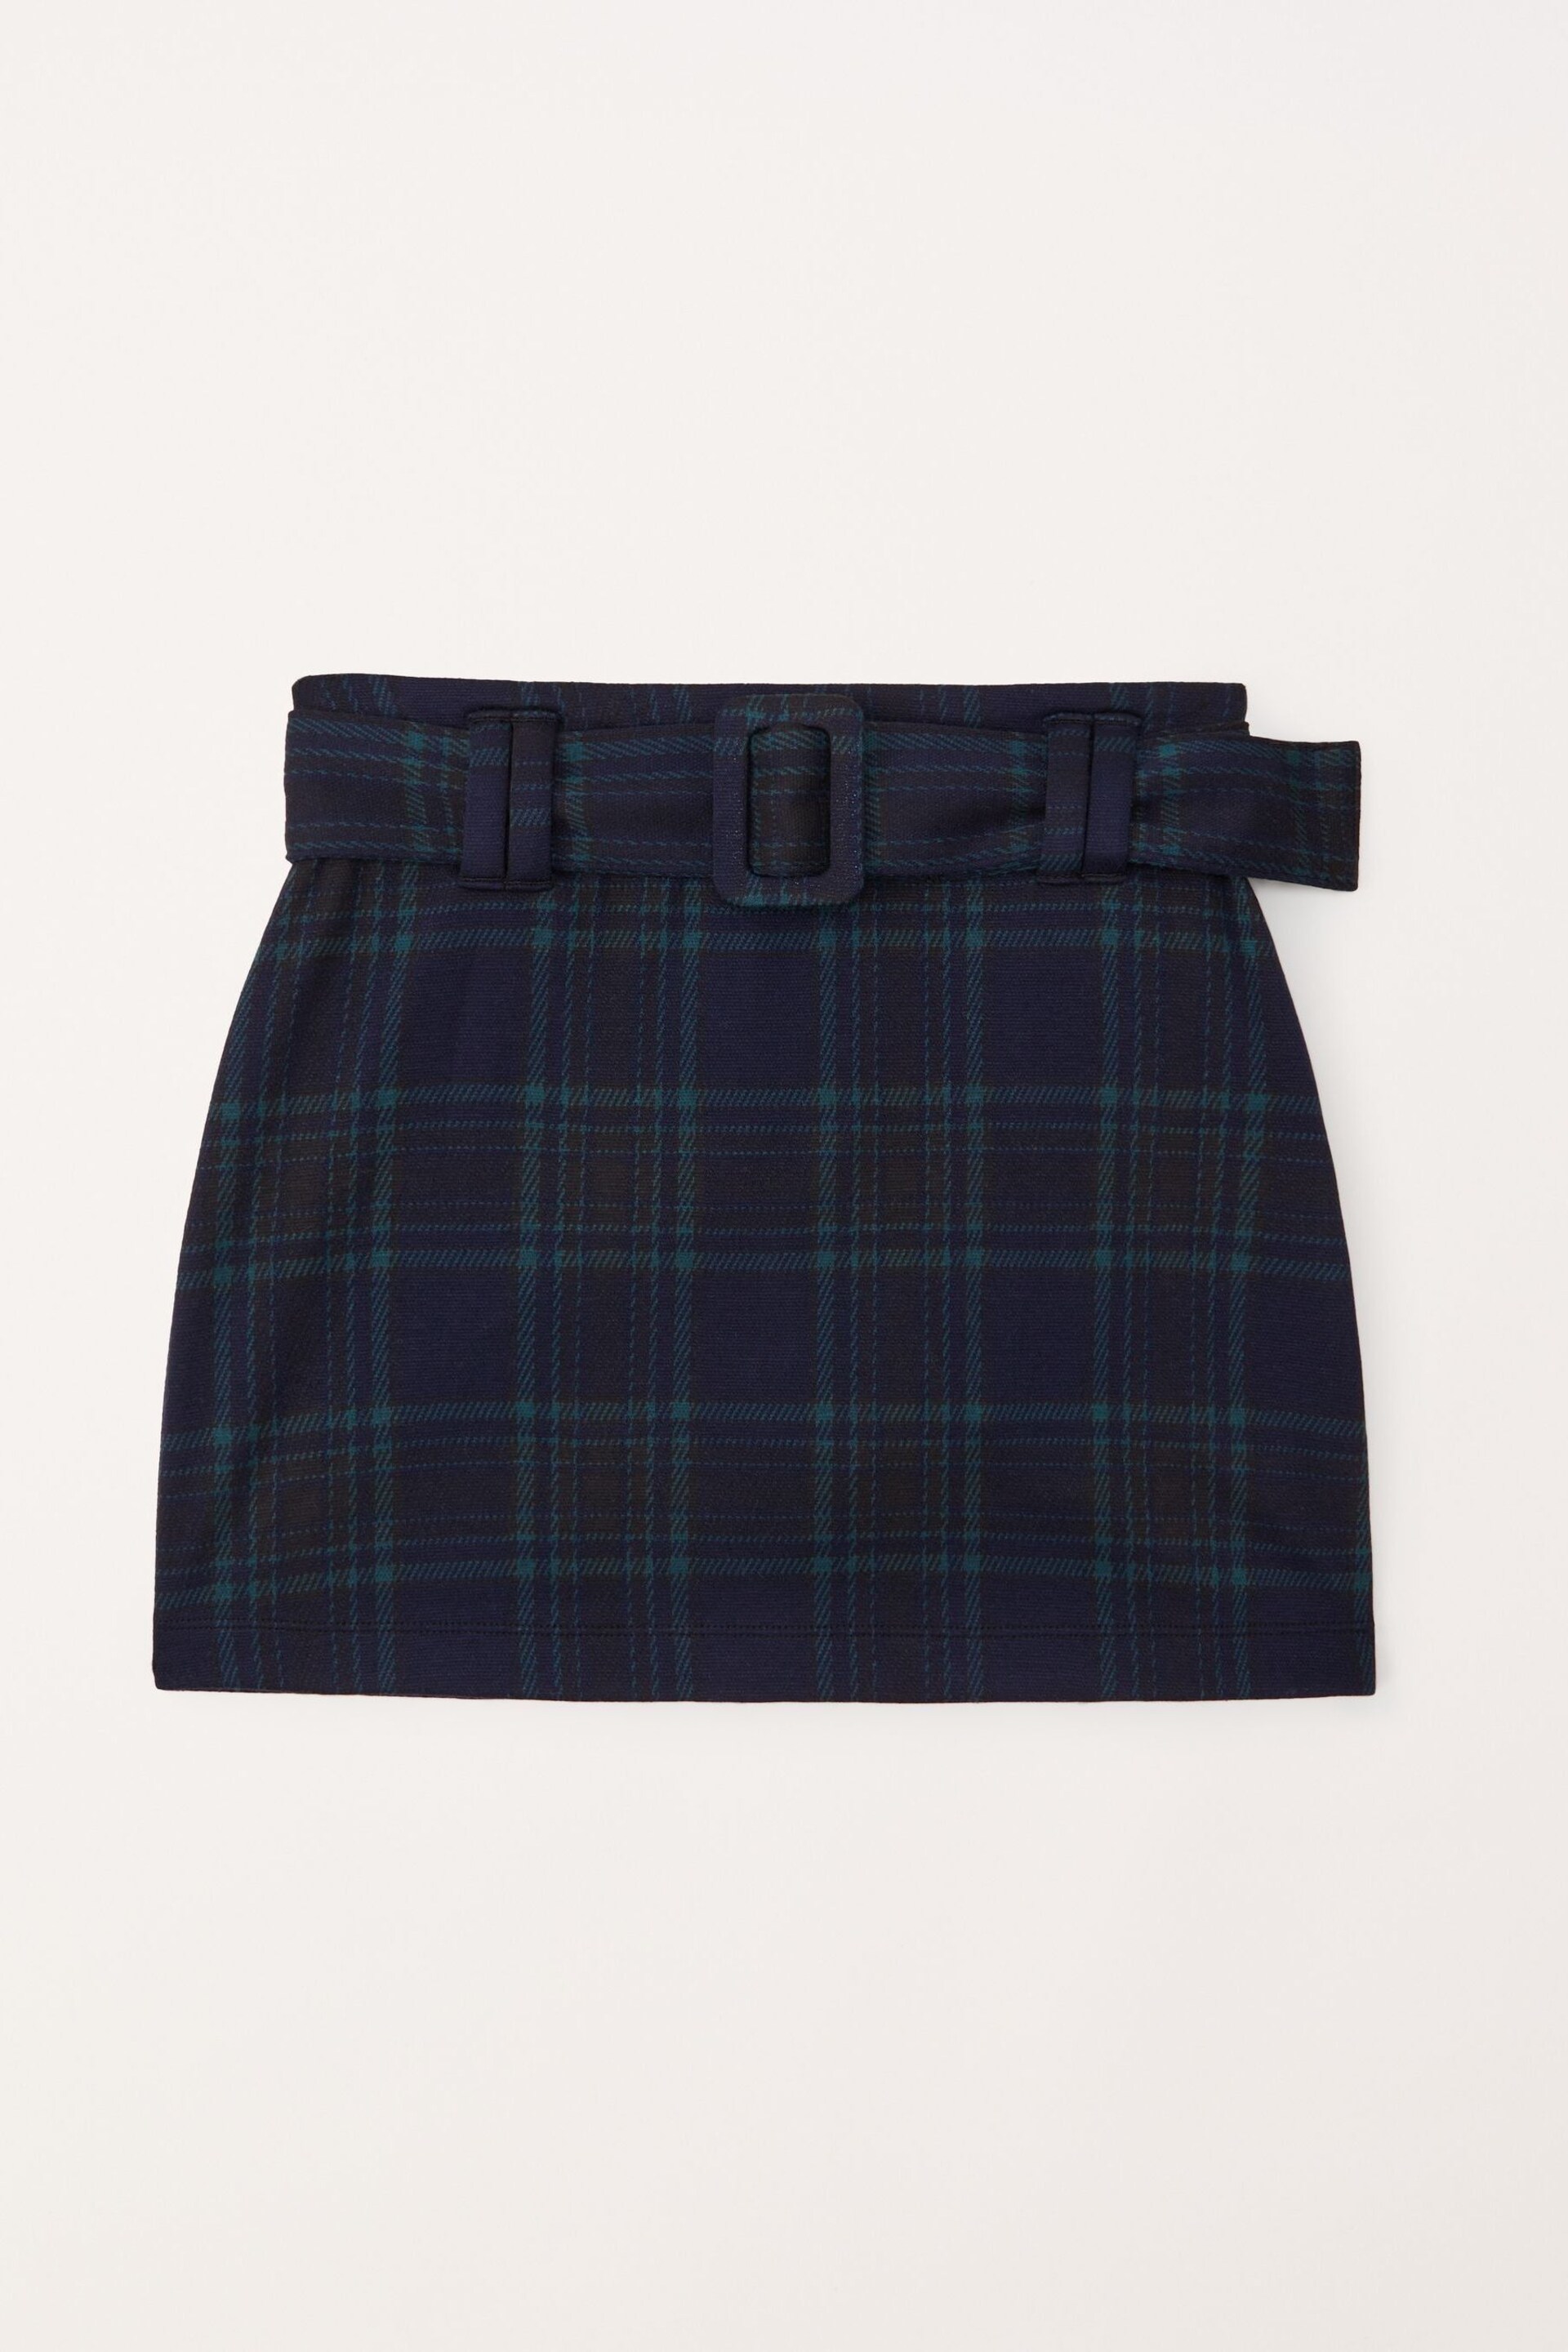 Abercrombie & Fitch Green Striped Belted Mini Short Skirt - Image 1 of 1